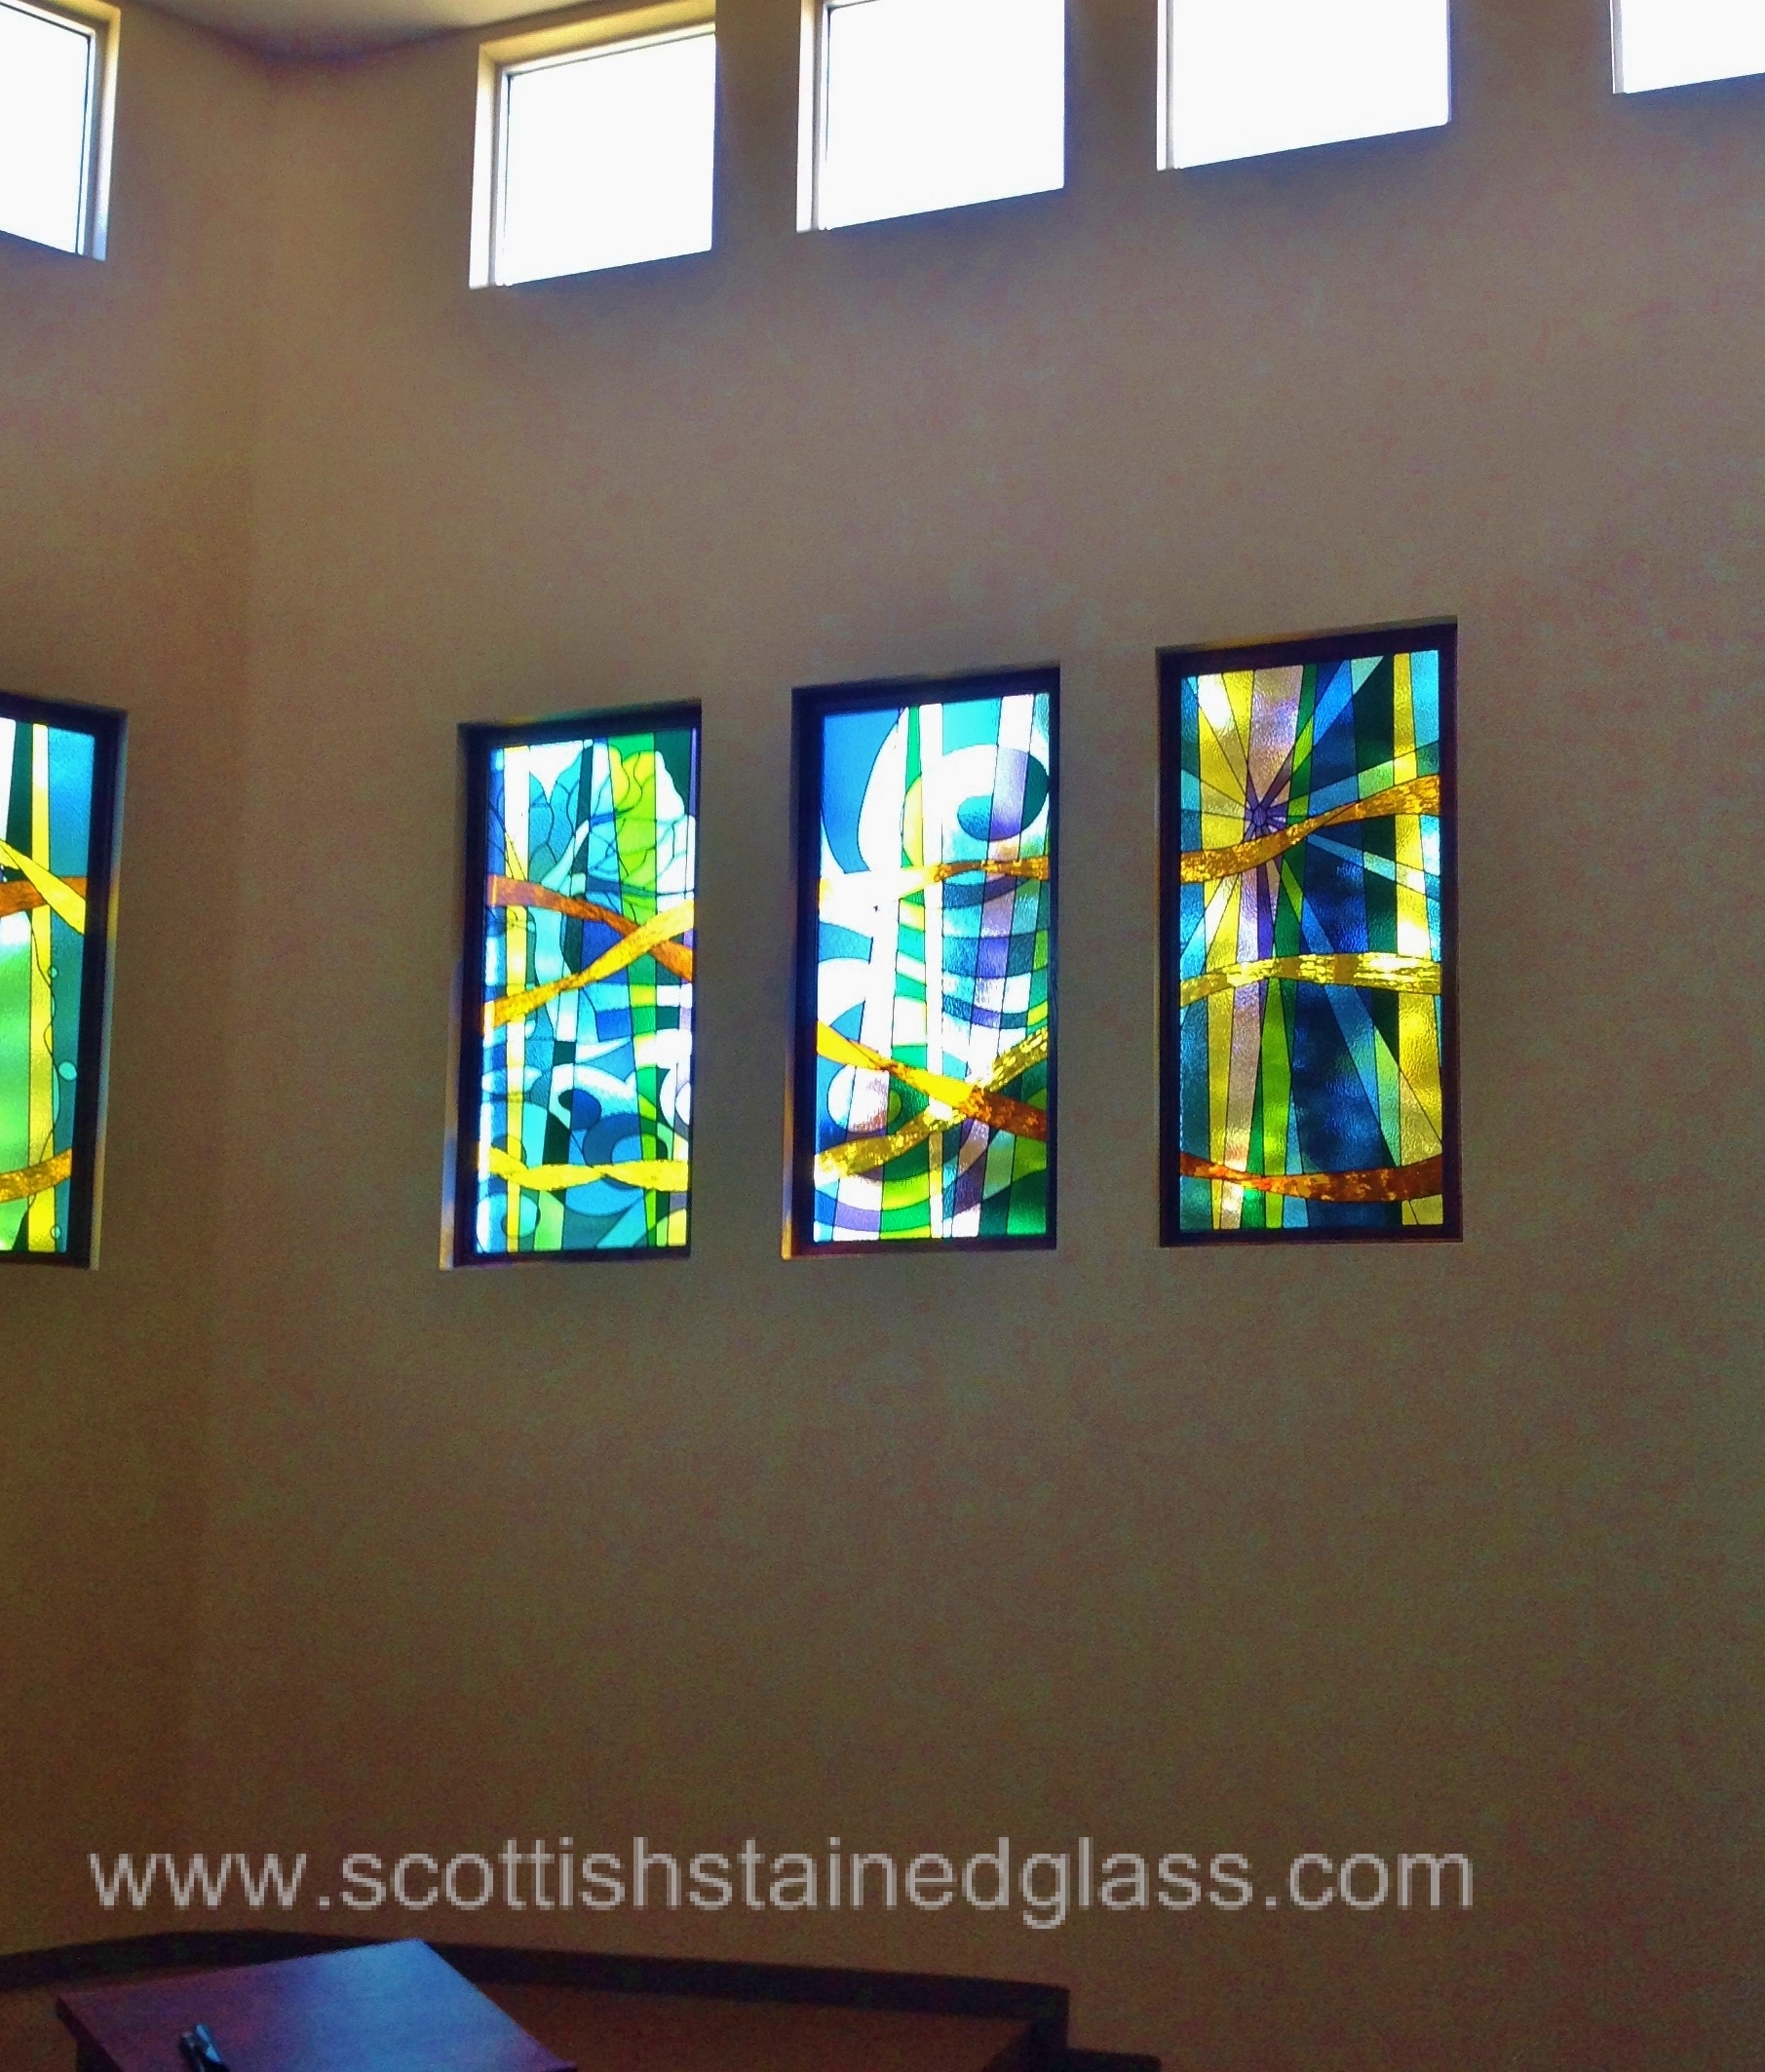 Houston church interior with vibrant stained glass windows depicting celestial scenes